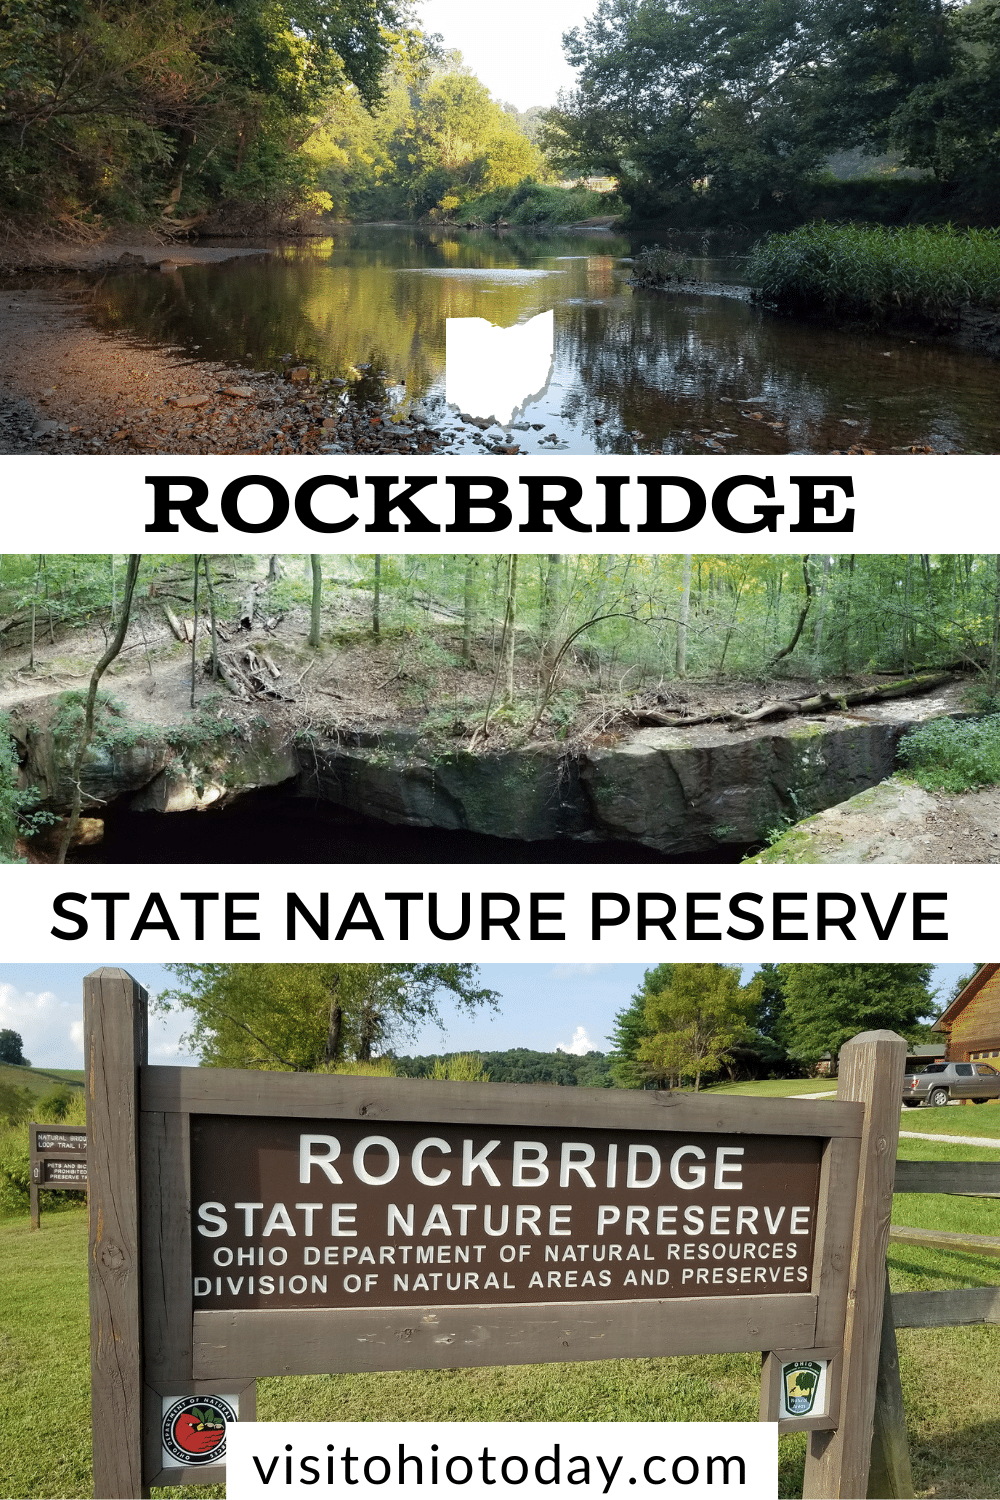 Rockbridge State Nature Preserve is home to the large, natural, Black Hand stone bridge known as Rock Bridge. It is more than 100-feet long and arches 50-feet across a ravine. It is the largest natural bridge in Ohio.